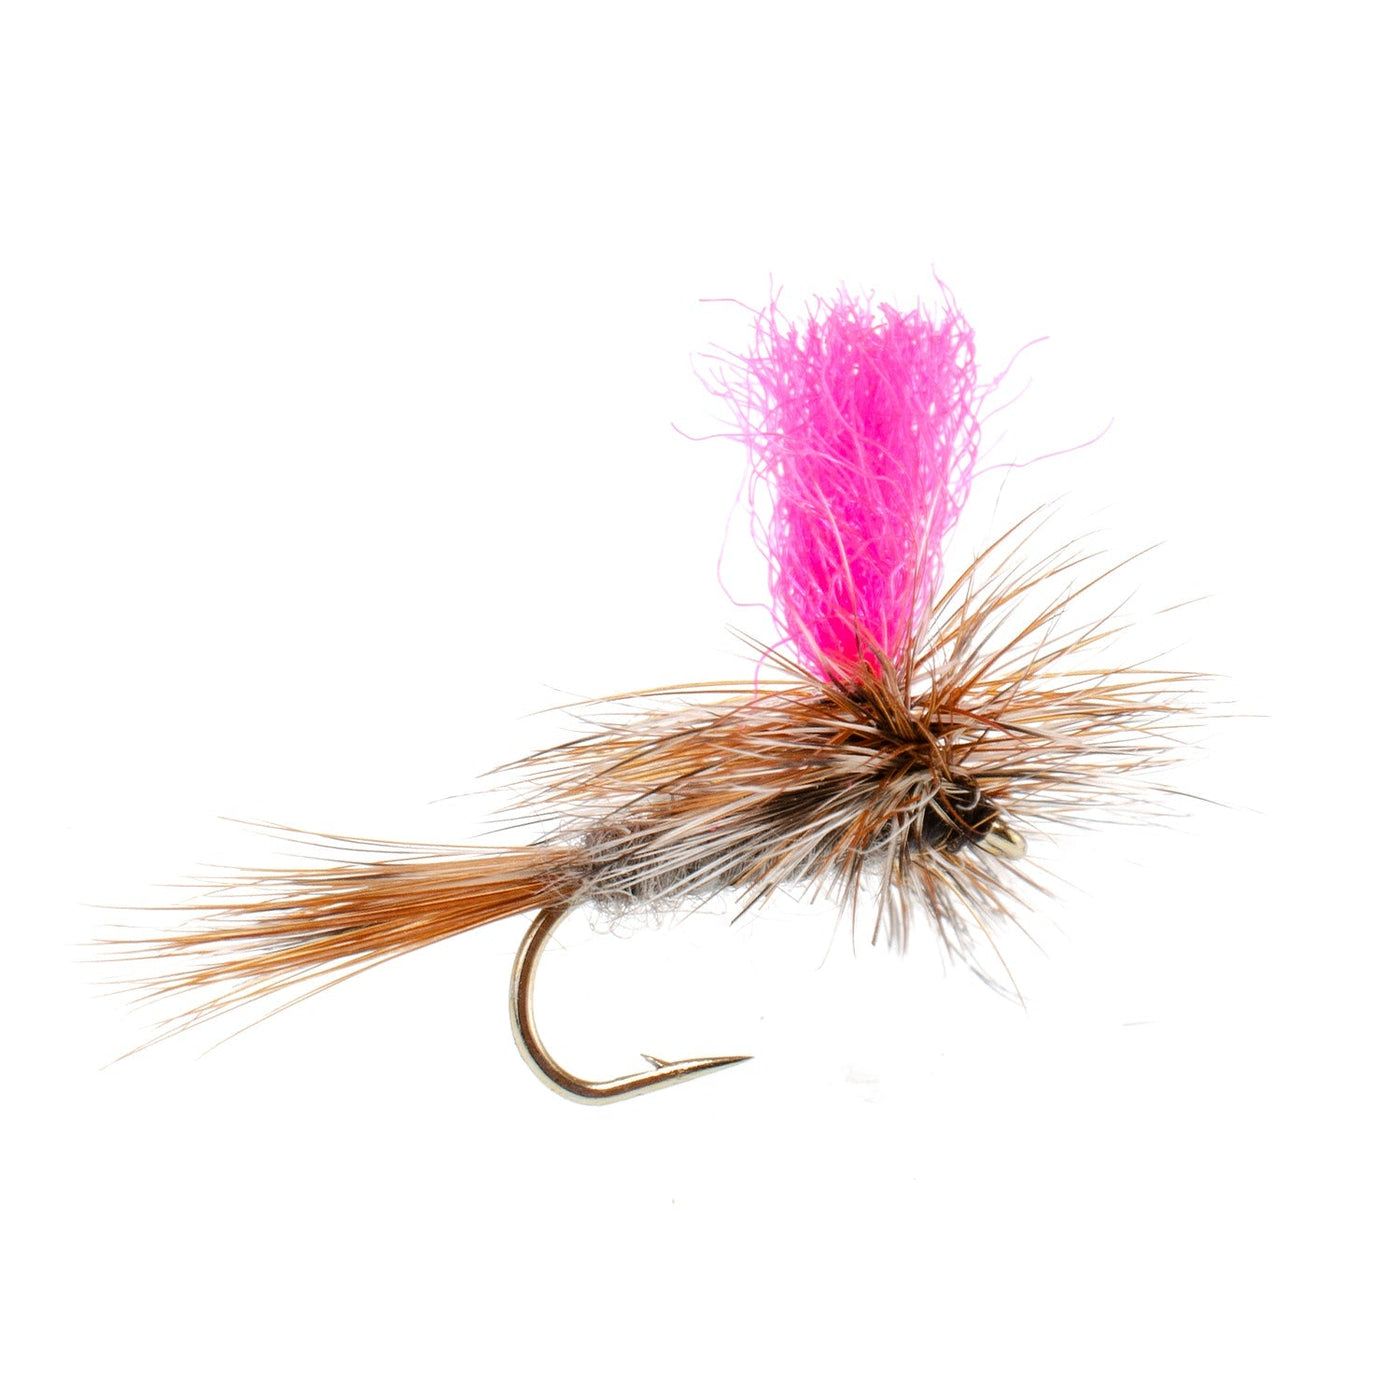 Eastern Trout Fly Assortment - 12 Essential Dry and Nymph Fly